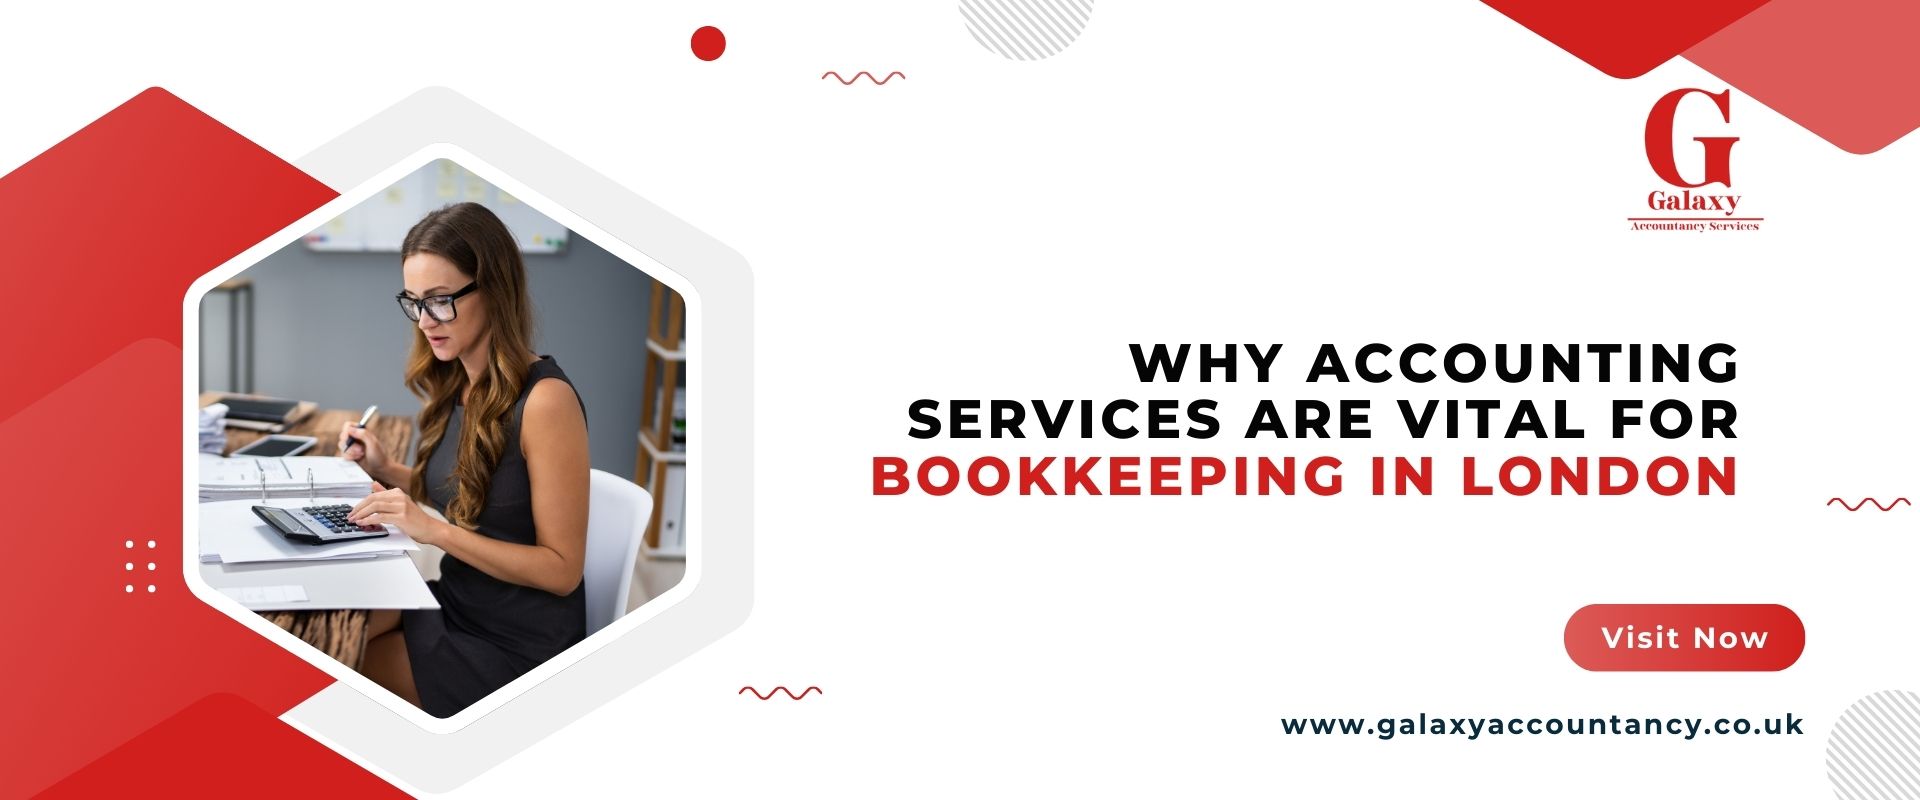 You are currently viewing Why Accounting Services Are Vital for Bookkeeping in London